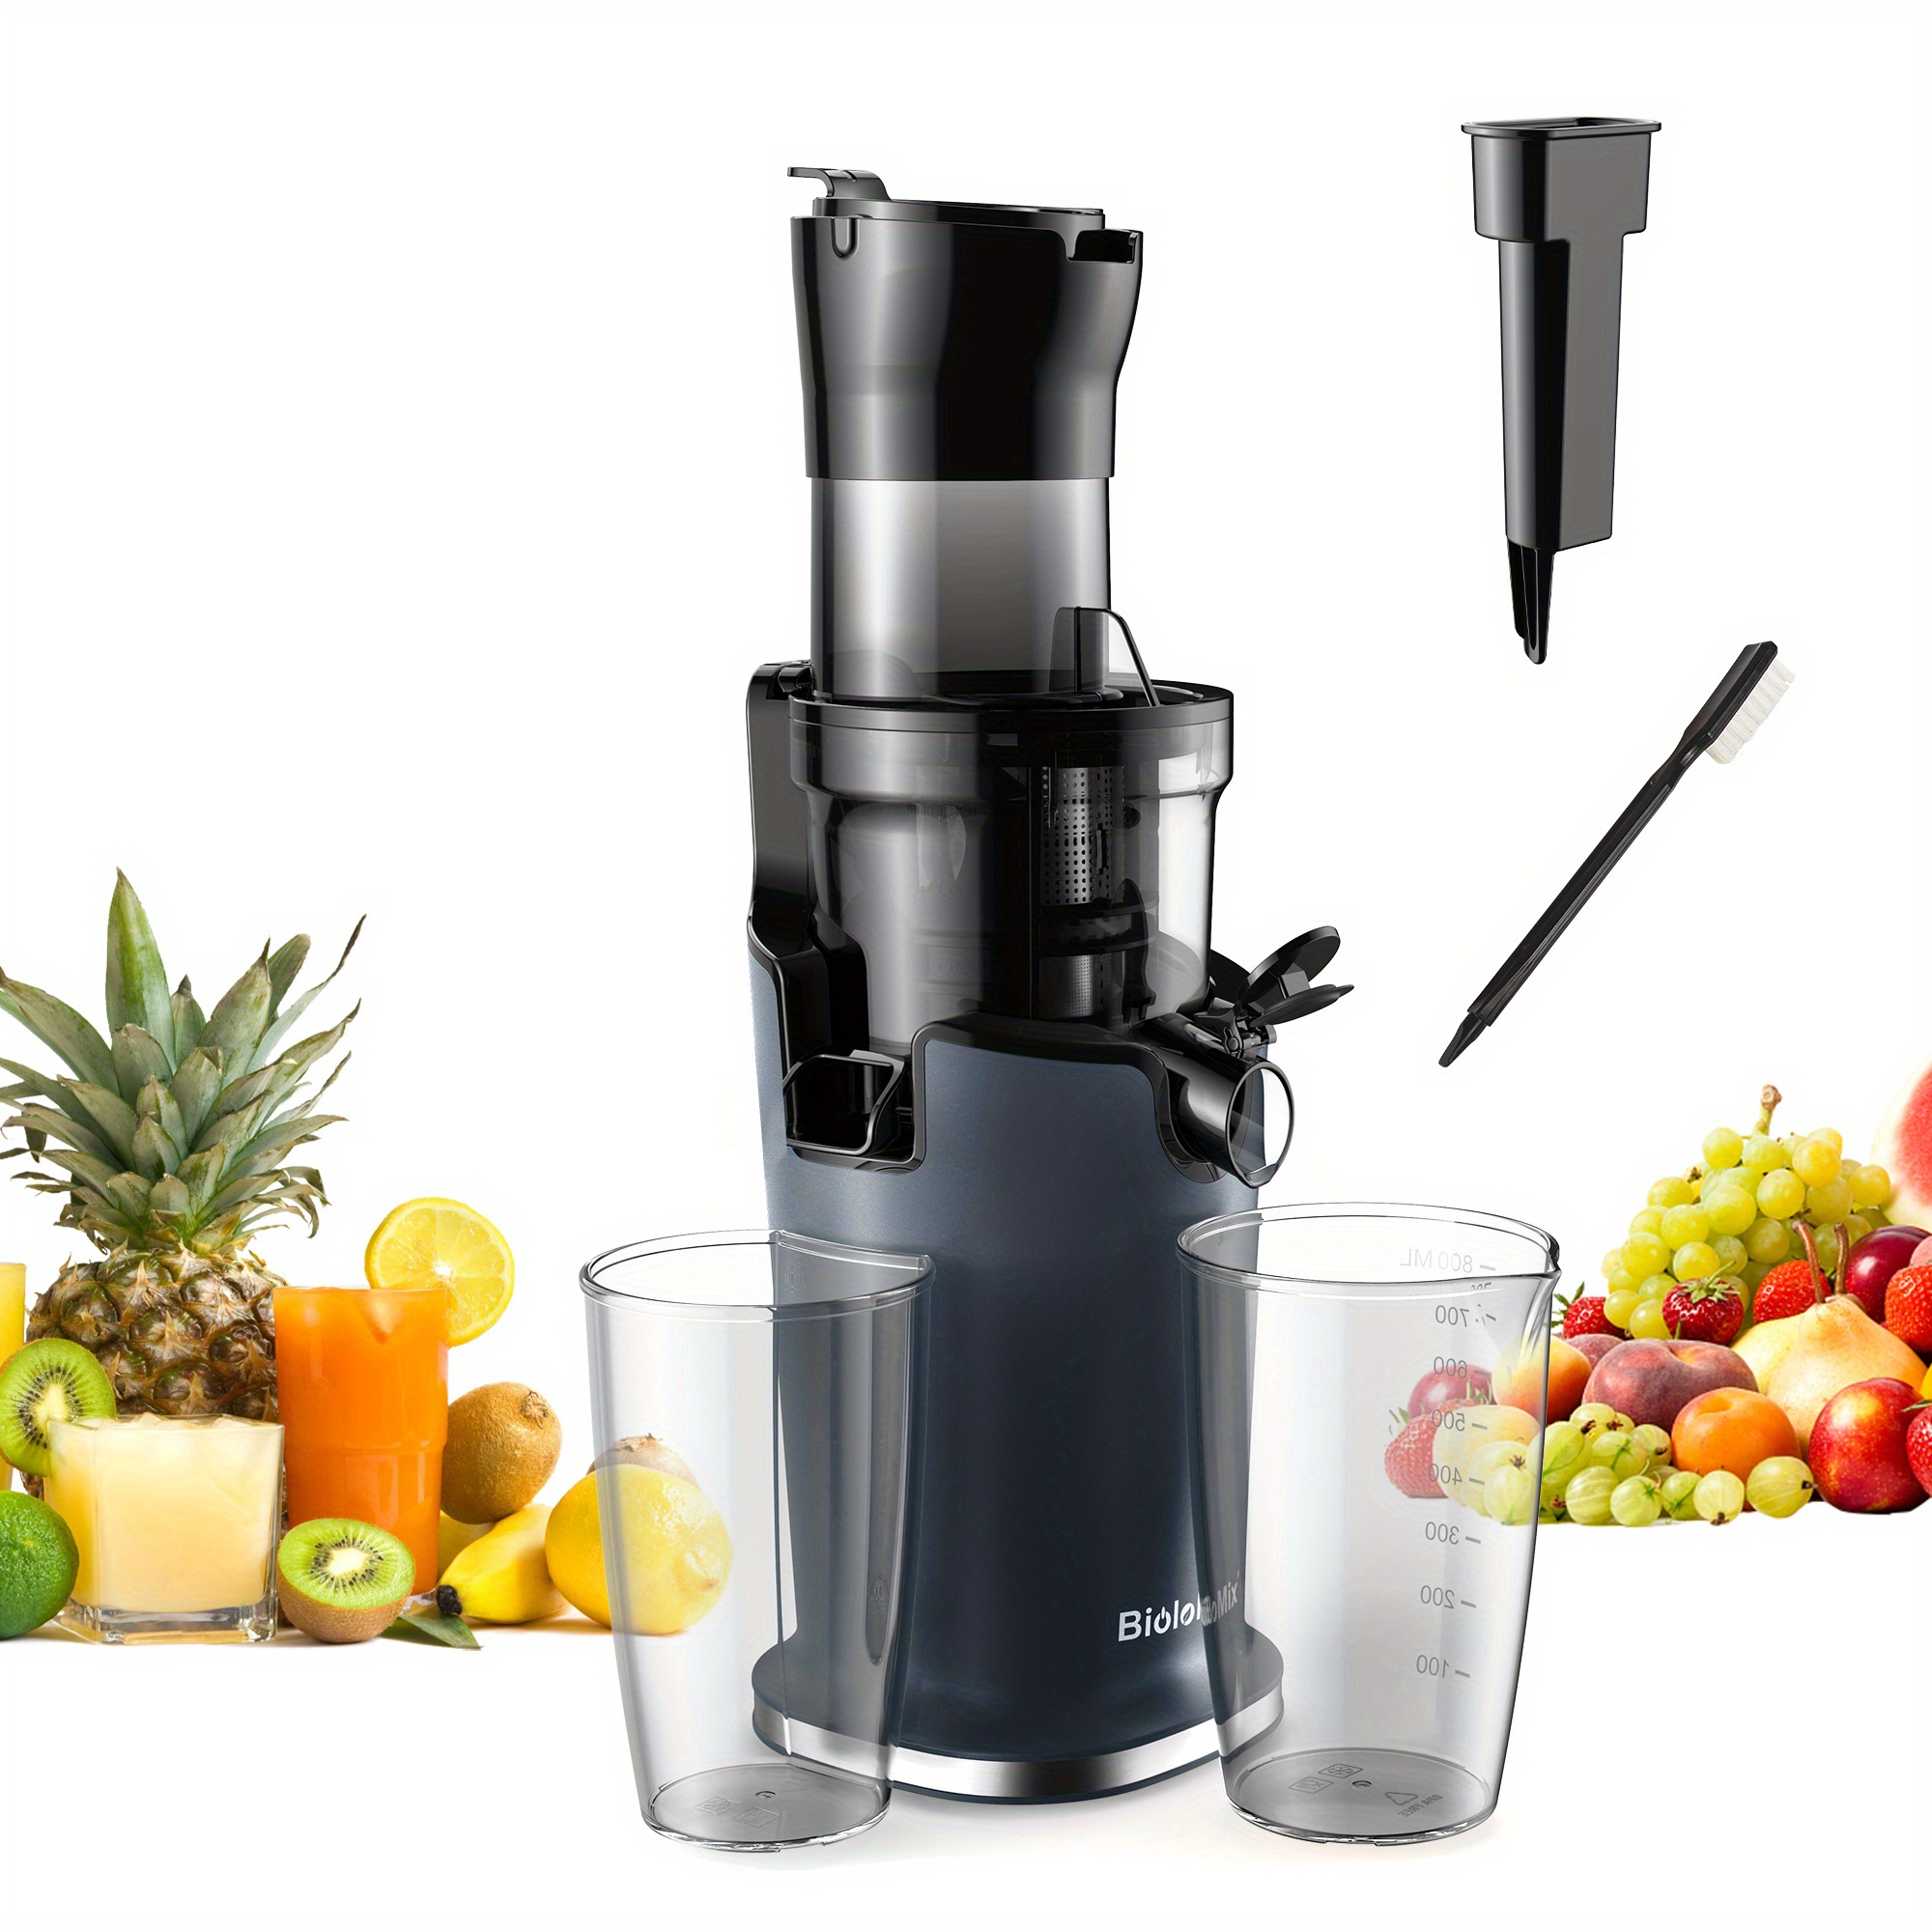 SiFENE Juicer Machine, Quick Juicer Extractor Maker, 3 Big Mouth for Whole  Veggies & Fruits, Easy to Clean, BPA Free, Durable Stainless Steel Kitchen